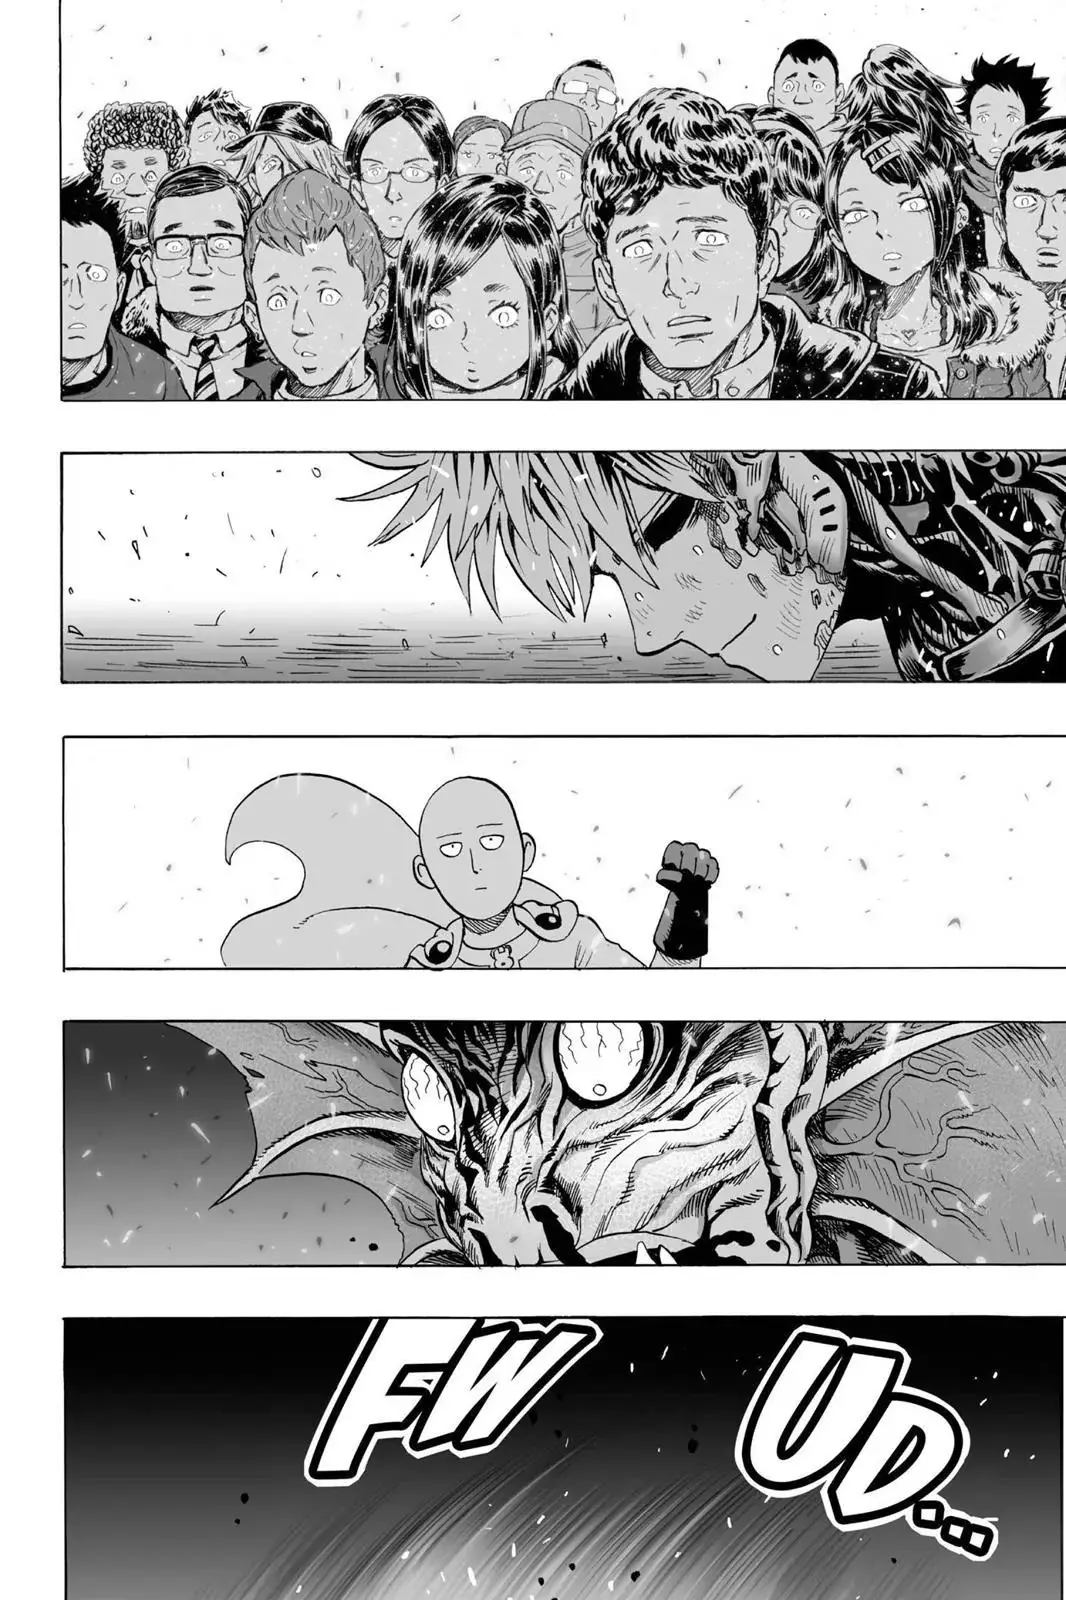 One Punch Man Chapter 28, READ One Punch Man Chapter 28 ONLINE, lost in the cloud genre,lost in the cloud gif,lost in the cloud girl,lost in the cloud goods,lost in the cloud goodreads,lost in the cloud,lost ark cloud gaming,lost odyssey cloud gaming,lost in the cloud fanart,lost in the cloud fanfic,lost in the cloud fandom,lost in the cloud first kiss,lost in the cloud font,lost in the cloud ending,lost in the cloud episode 97,lost in the cloud edit,lost in the cloud explained,lost in the cloud dog,lost in the cloud discord server,lost in the cloud desktop wallpaper,lost in the cloud drawing,can't find my cloud on network,lost in the cloud characters,lost in the cloud chapter 93 release date,lost in the cloud birthday,lost in the cloud birthday art,lost in the cloud background,lost in the cloud banner,lost in the clouds meaning,what is the black cloud in lost,lost in the cloud ao3,lost in the cloud anime,lost in the cloud art,lost in the cloud author twitter,lost in the cloud author instagram,lost in the cloud artist,lost in the cloud acrylic stand,lost in the cloud artist twitter,lost in the cloud art style,lost in the cloud analysis